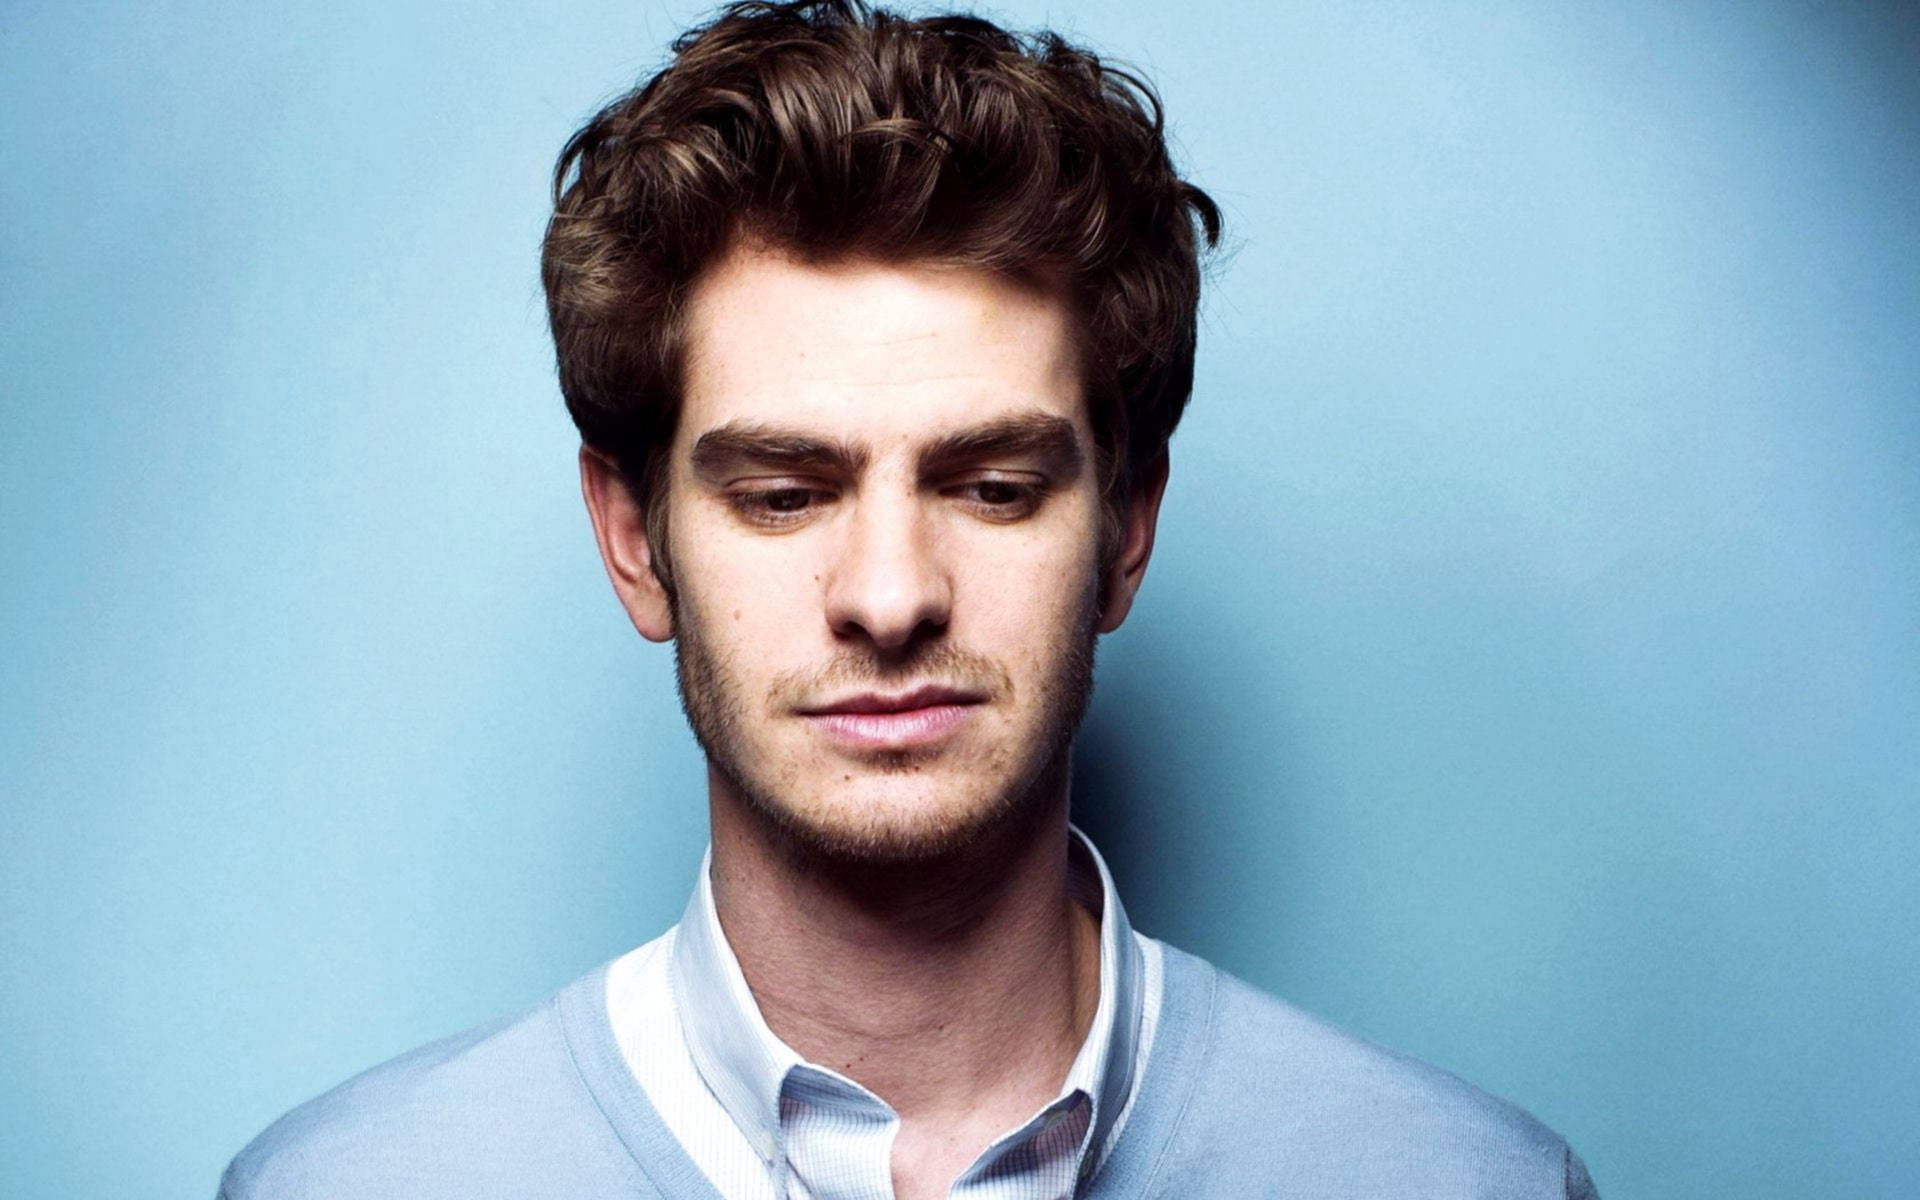 Andrew Garfield Engaged in a Sophisticated Photoshoot Wallpaper